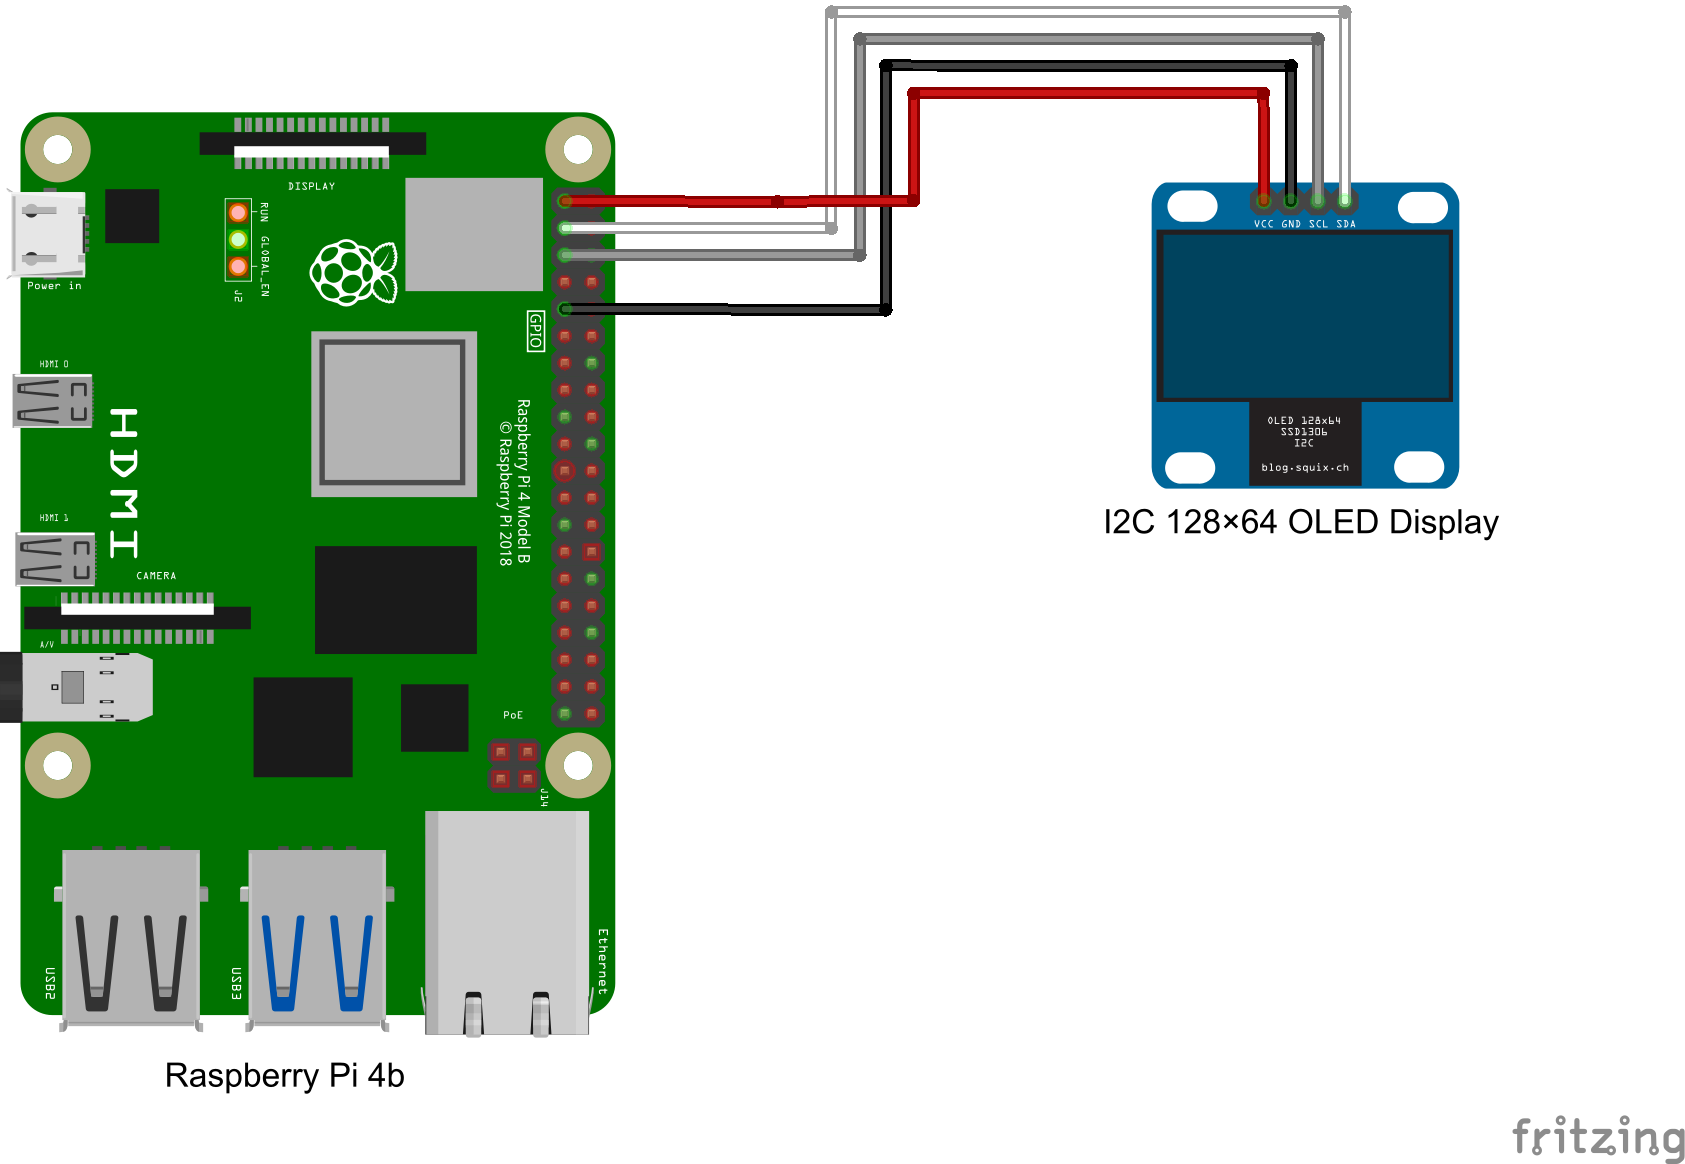 Raspberry Pi 4 I2C 128×64 OLED Display PIN connection